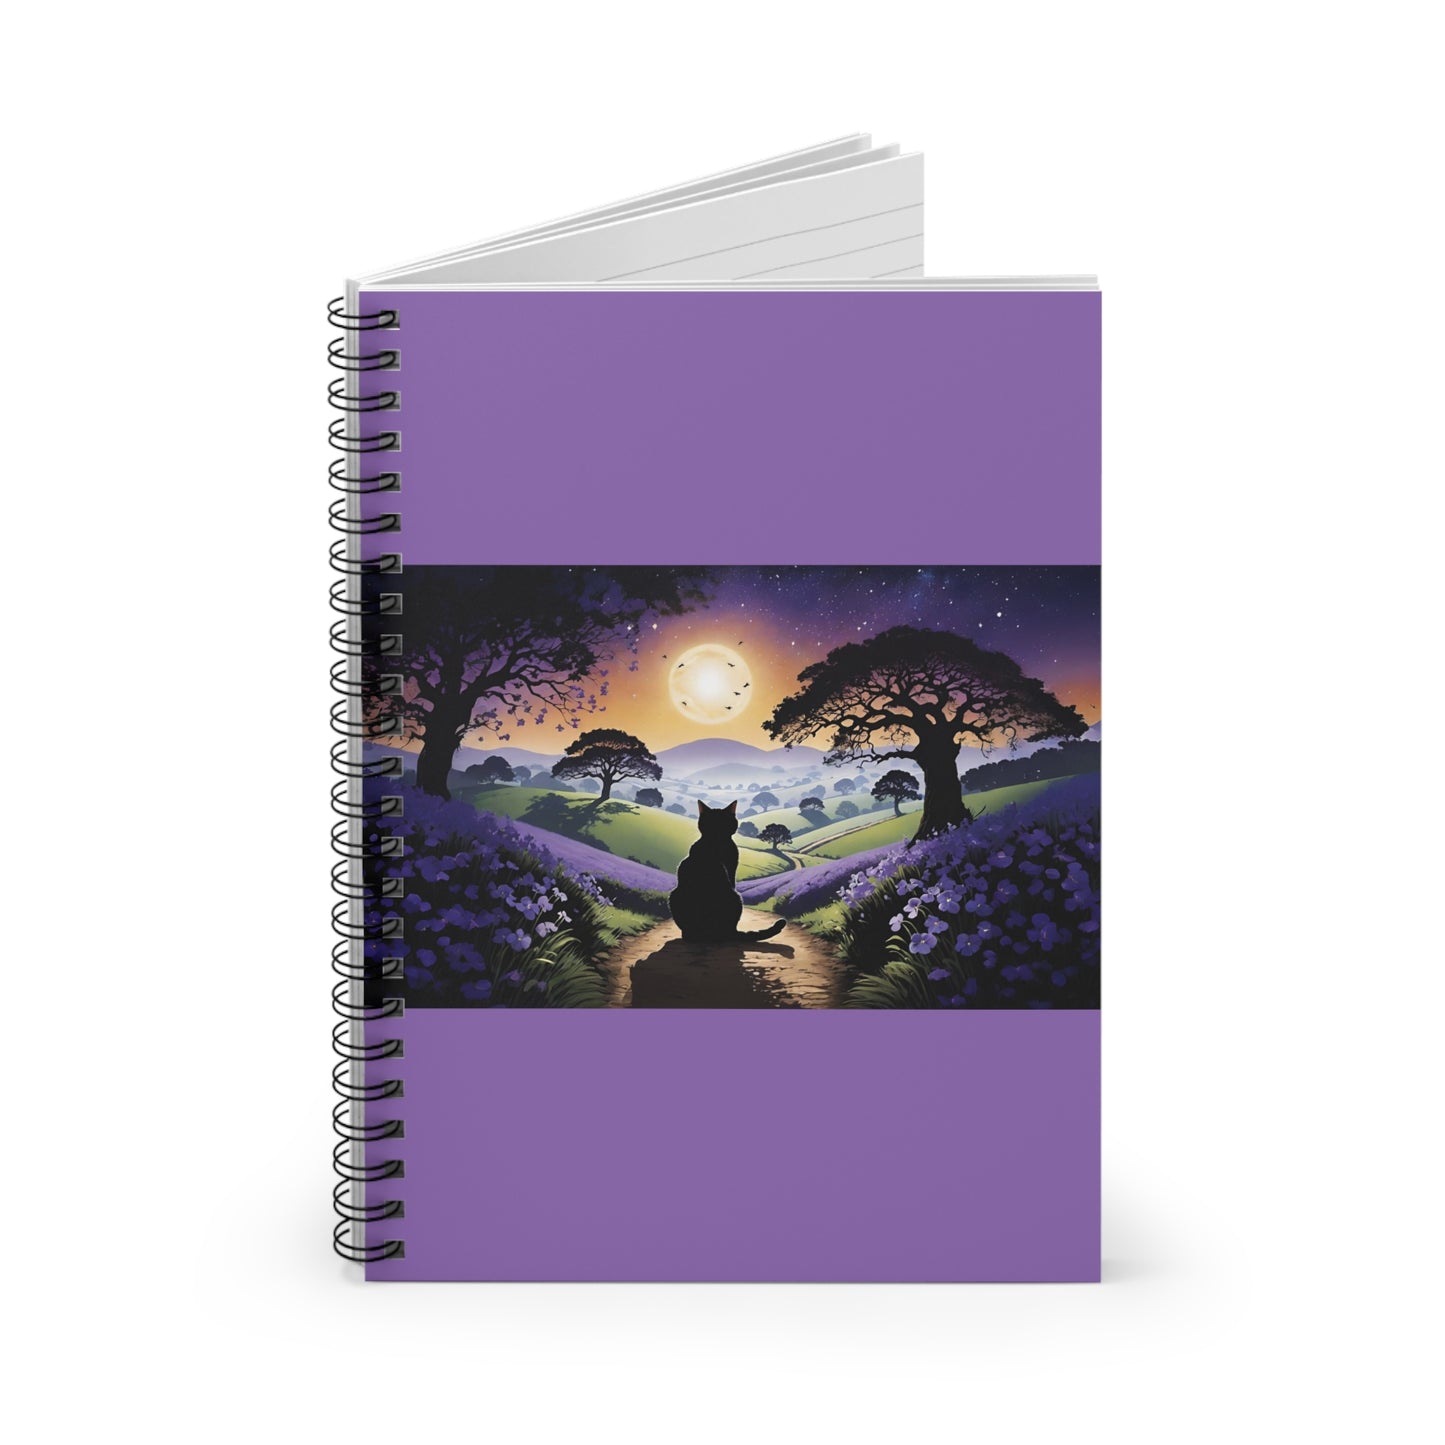 "I'll Wait For You" Silhouette Of Cat At Sunset On Path Of Lavender Spiral Notebook - Ruled Line